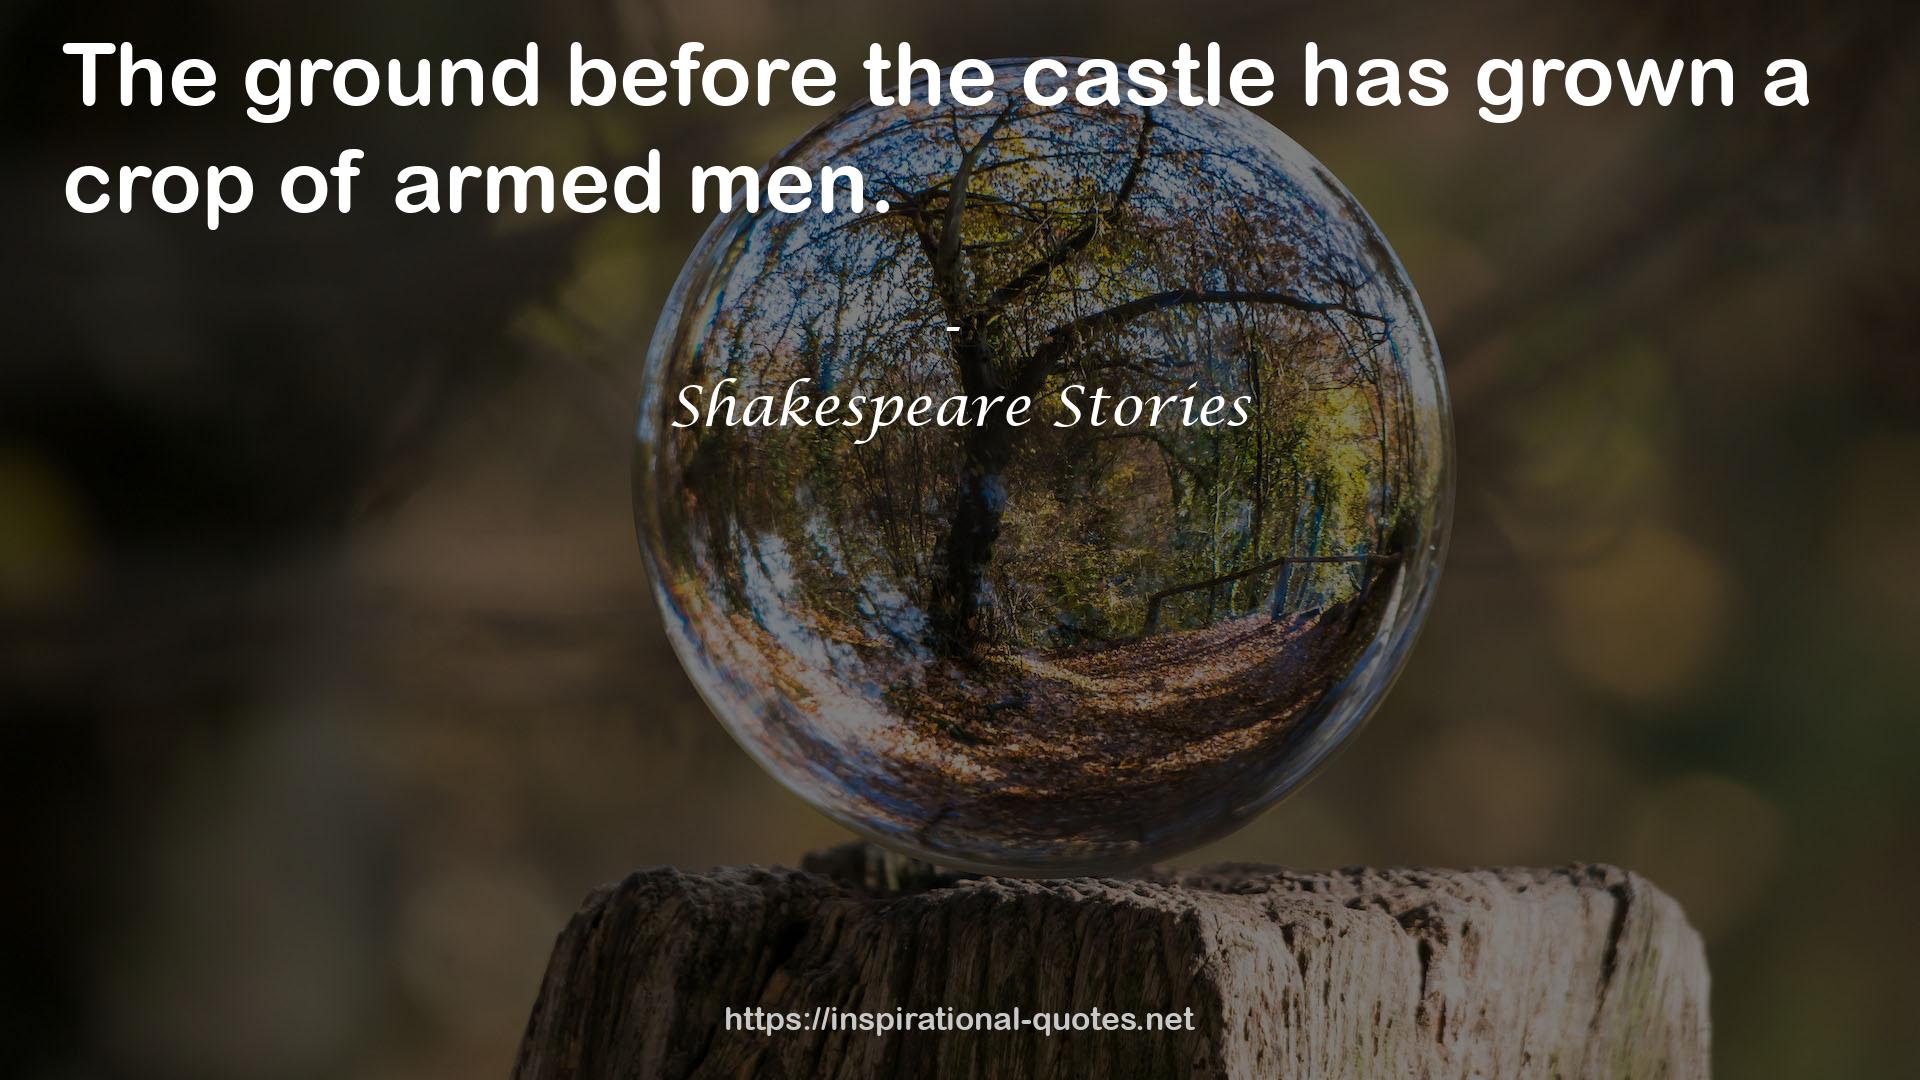 Shakespeare Stories QUOTES